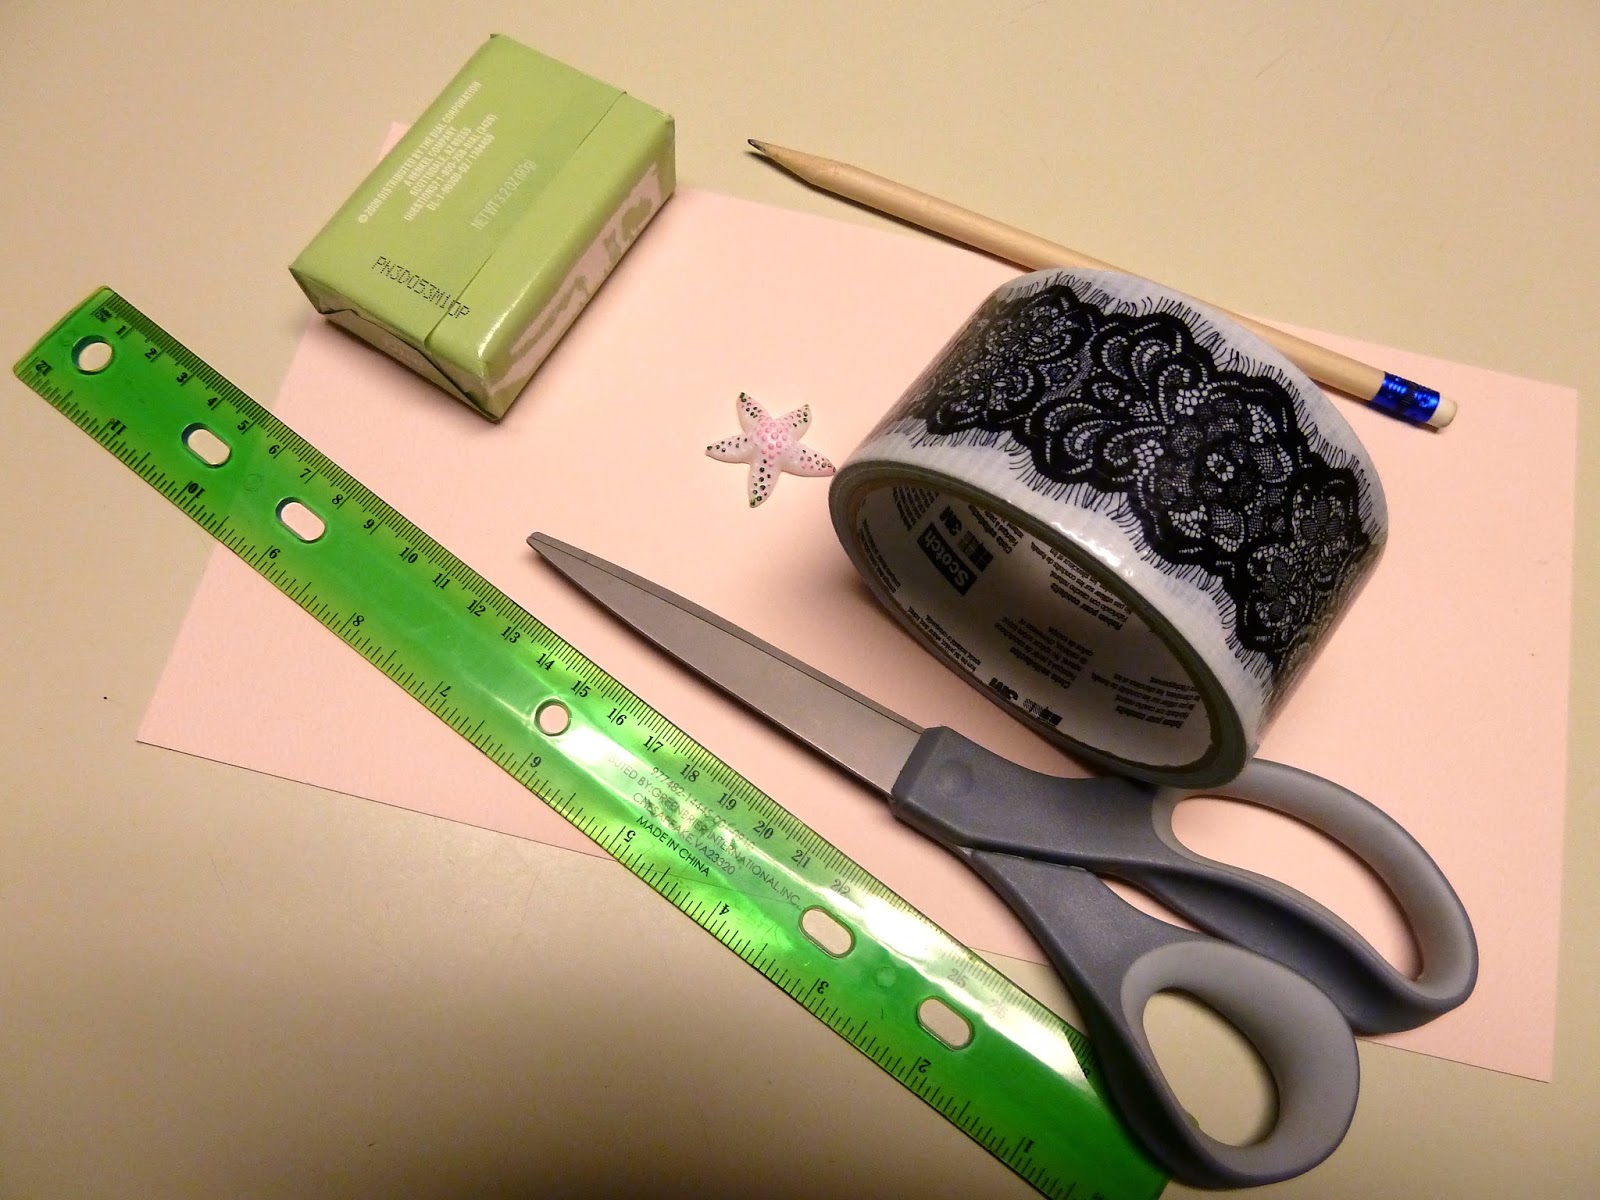 Scotch Masking Tape with Ruler - Bling Your Things - Rhinestones